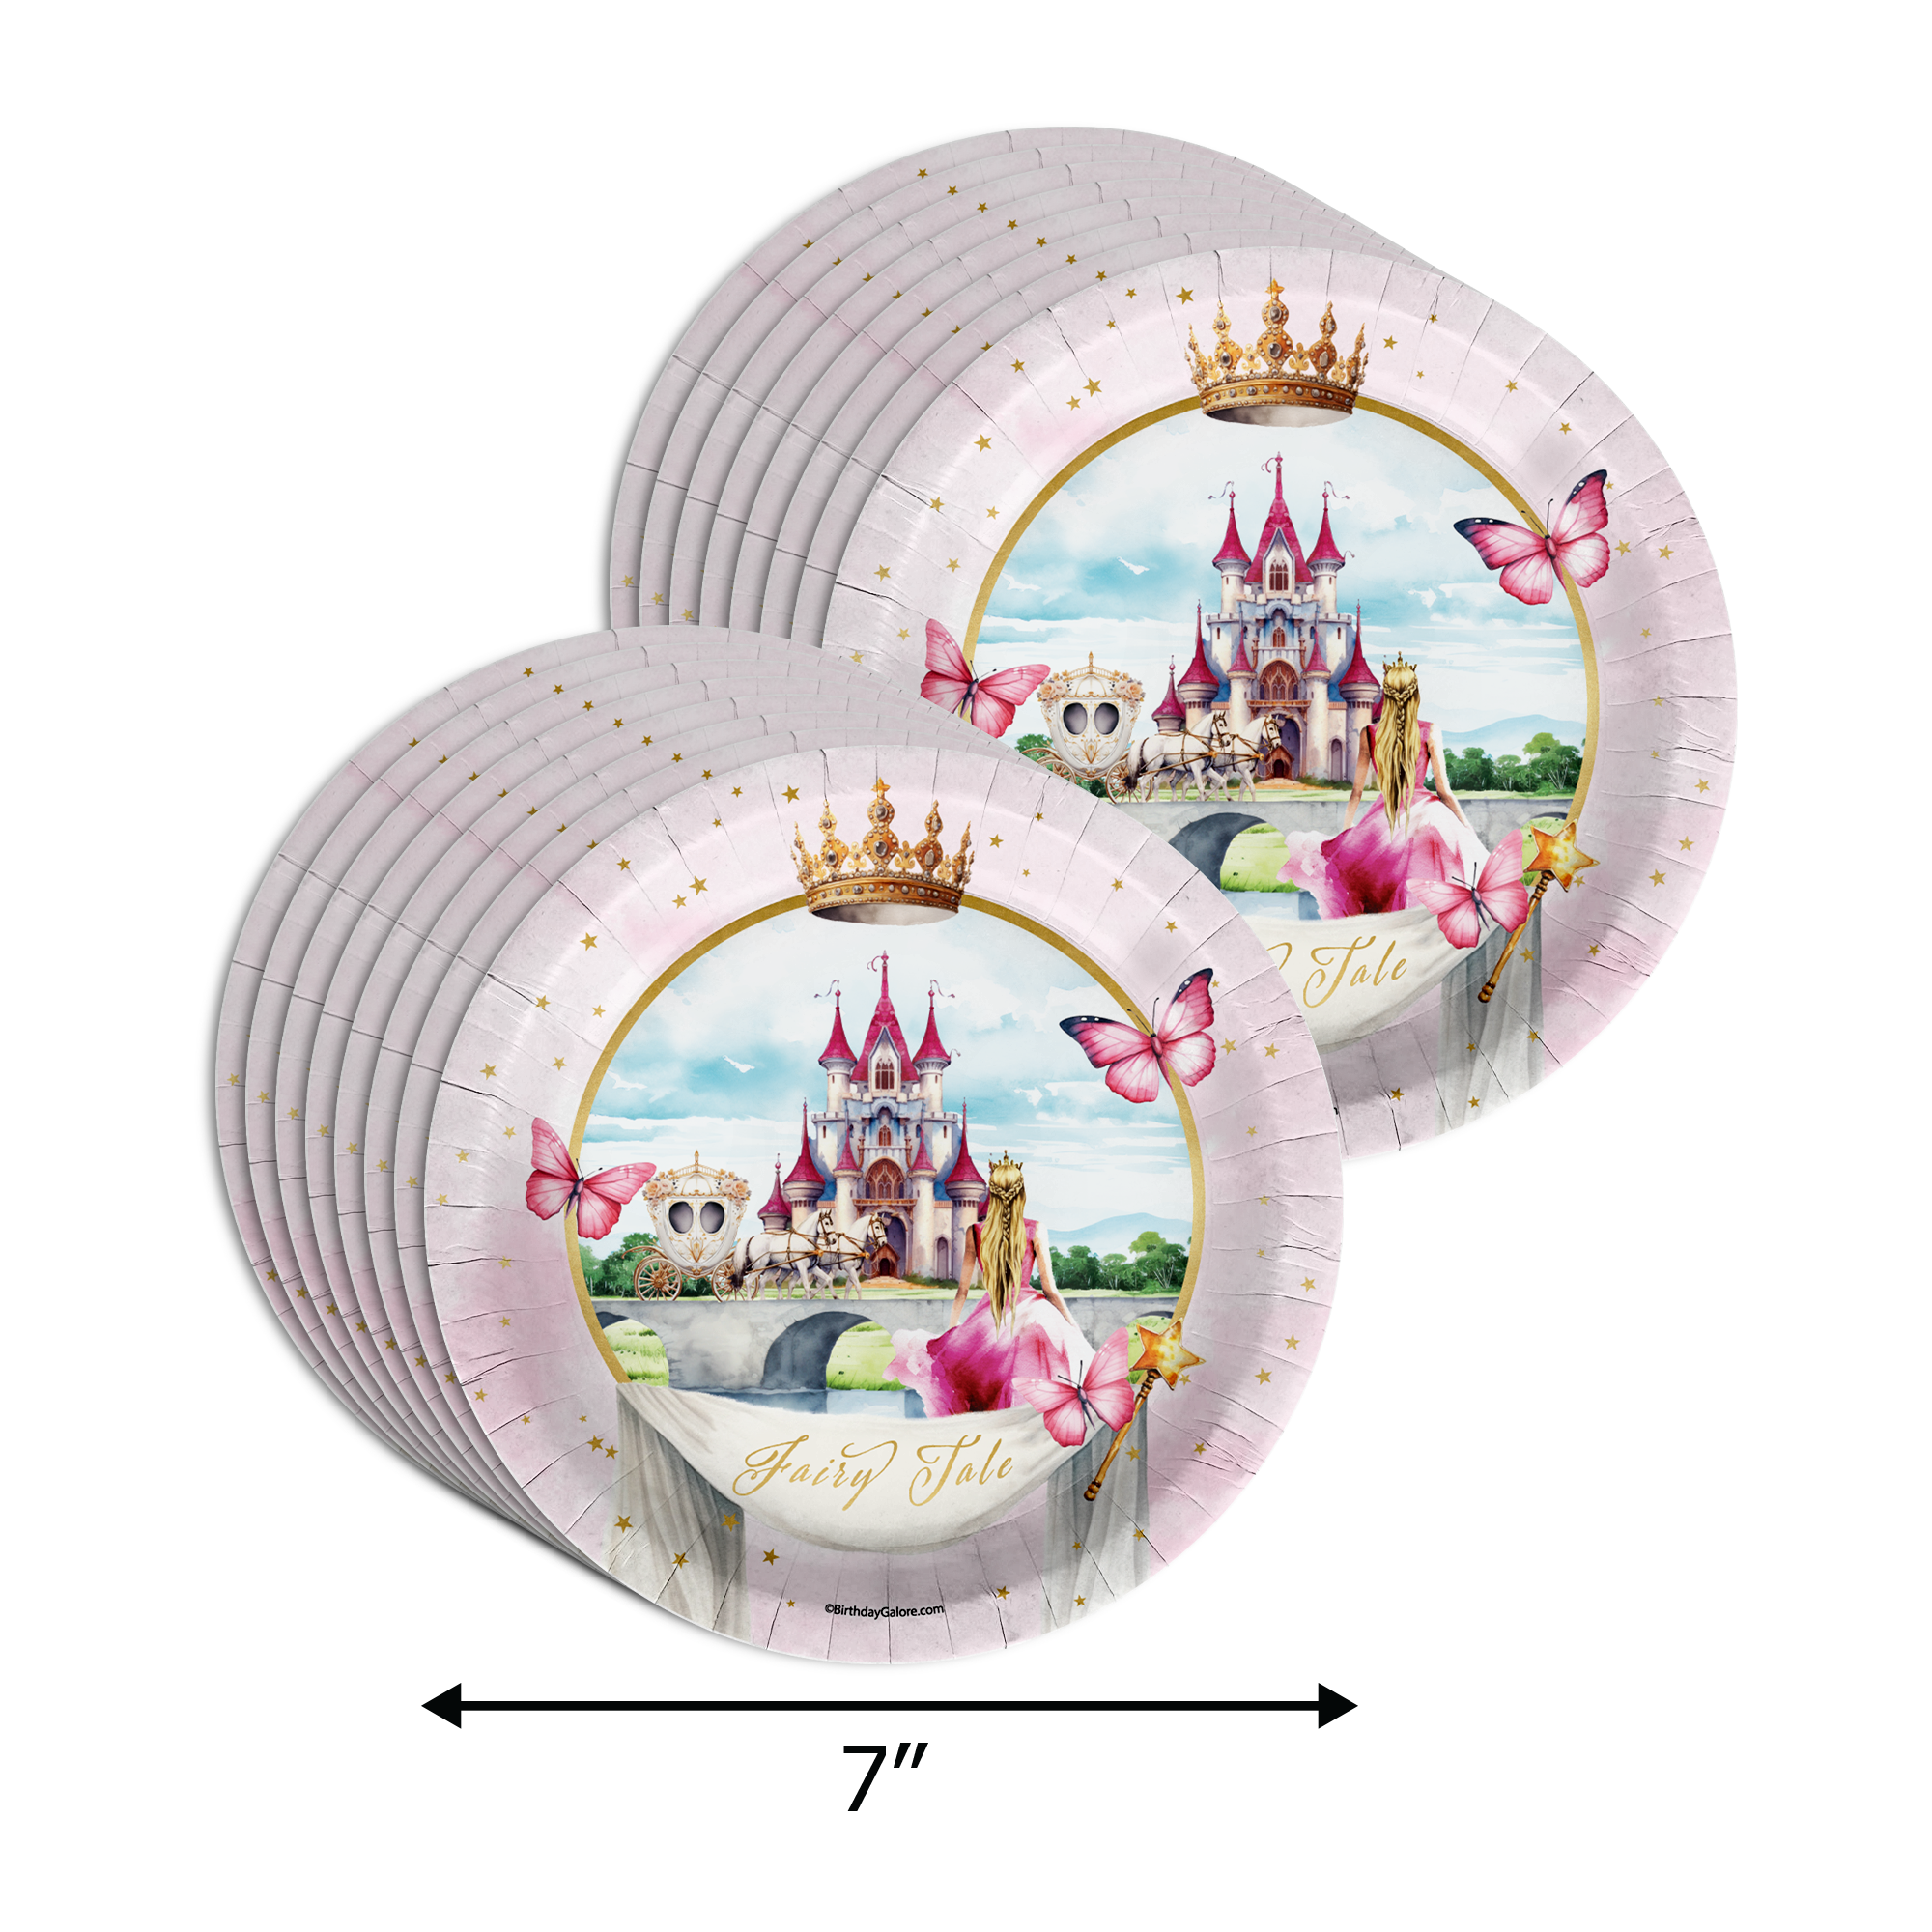 Fairytale Princess 1st Birthday Party Supplies 64 Piece Tableware Set Includes Large 9" Paper Plates Dessert Plates, Cups and Napkins Kit for 16